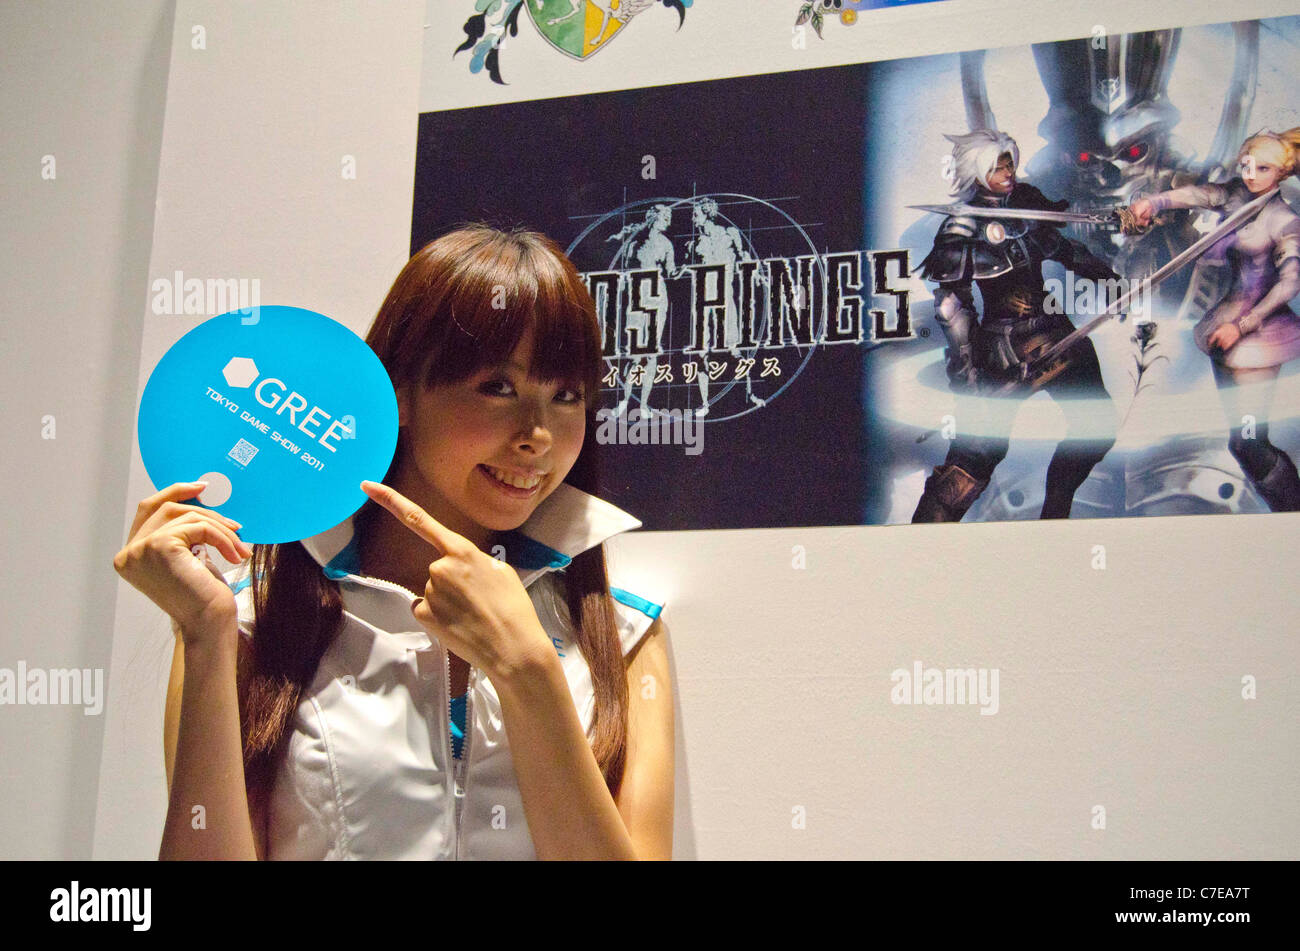 Gree's campaign girl poses for pictures during the Tokyo Game Show 2011 in Makuhari. Stock Photo